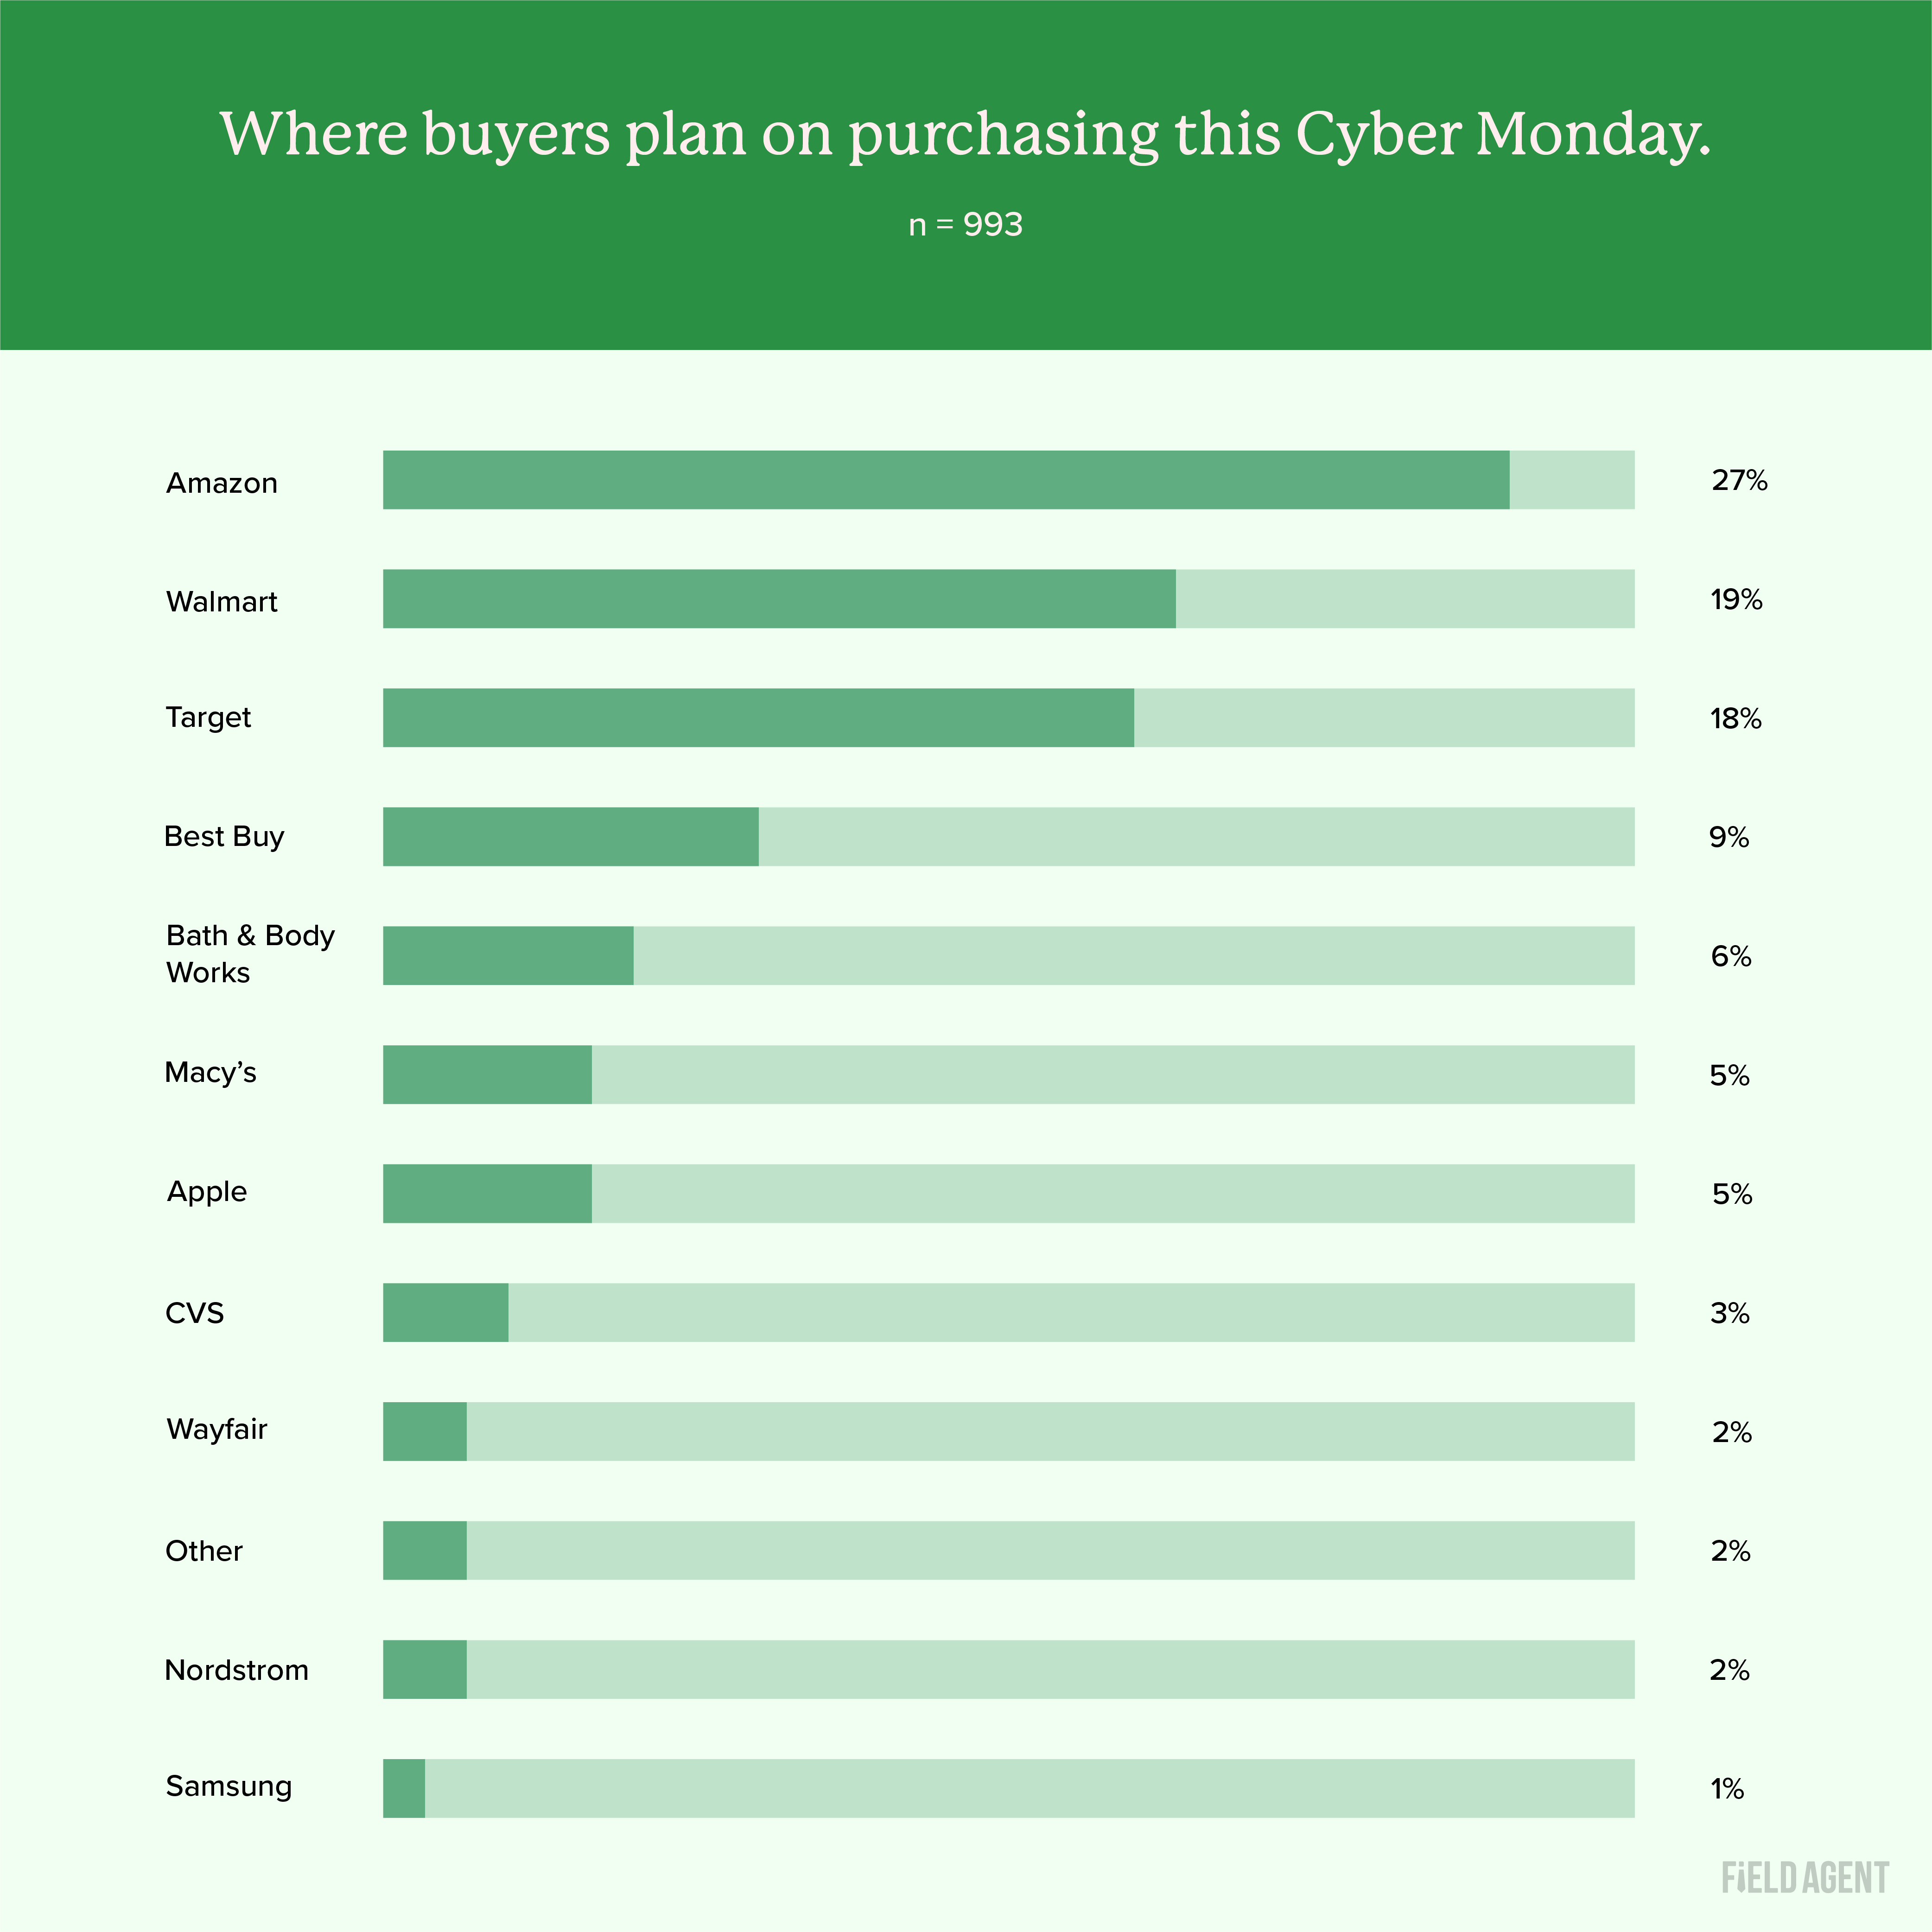 Where shoppers are planning to purchase Cyber Monday 2022